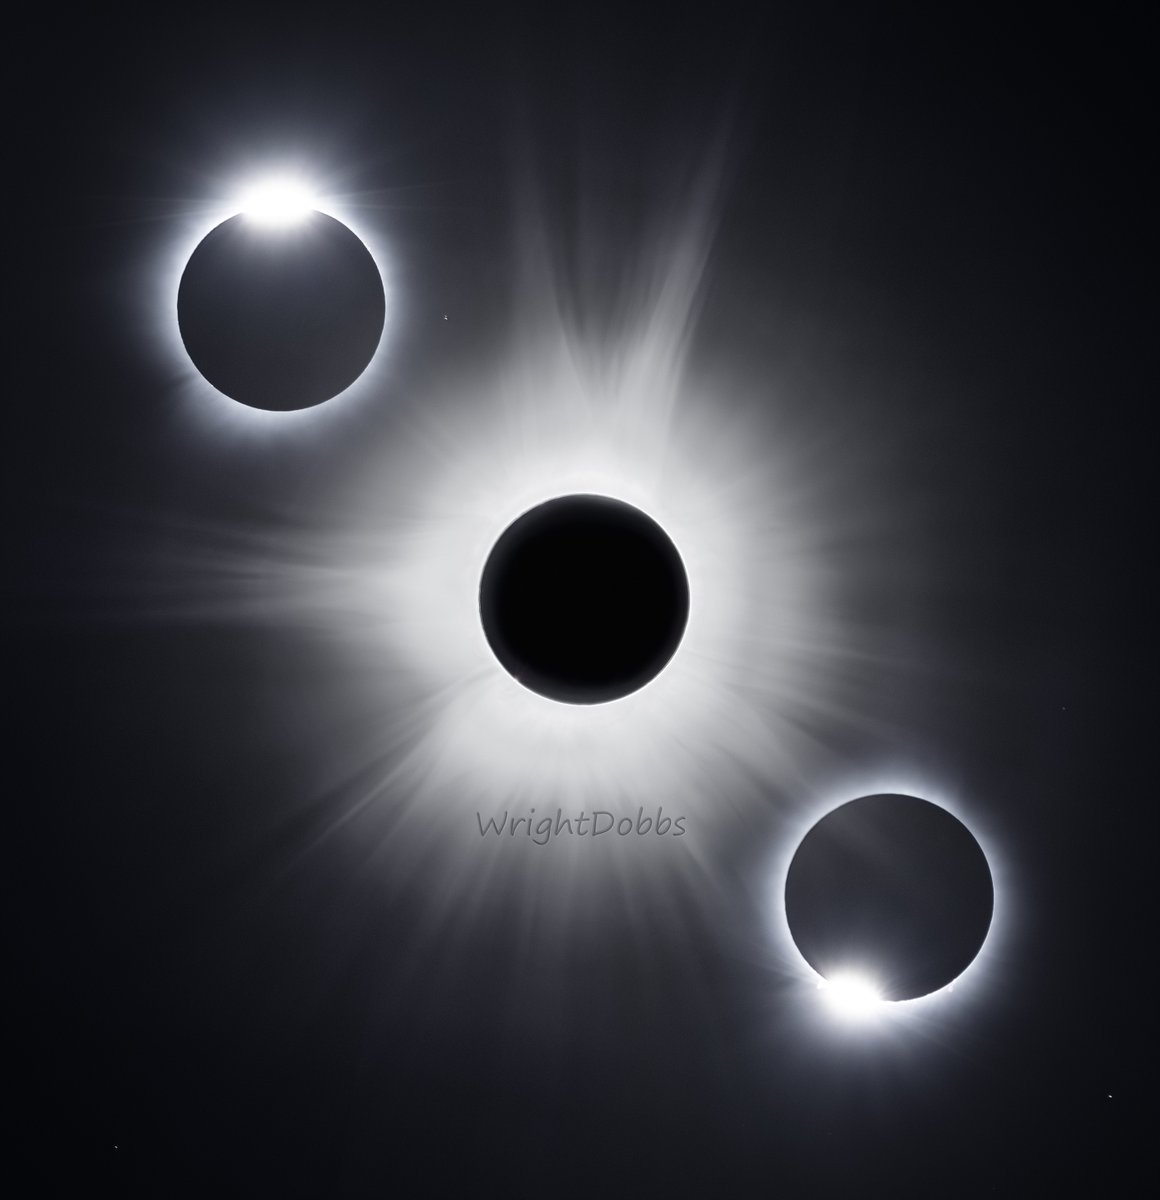 Had time this morning to work on my first eclipse composite. The two brilliant diamond rings before/after totality are composited here with the Sun's coronal streamers. This is a combination of multiple images to show the detail! #Eclipse2024 #SolarEclipse @spann #ARwx